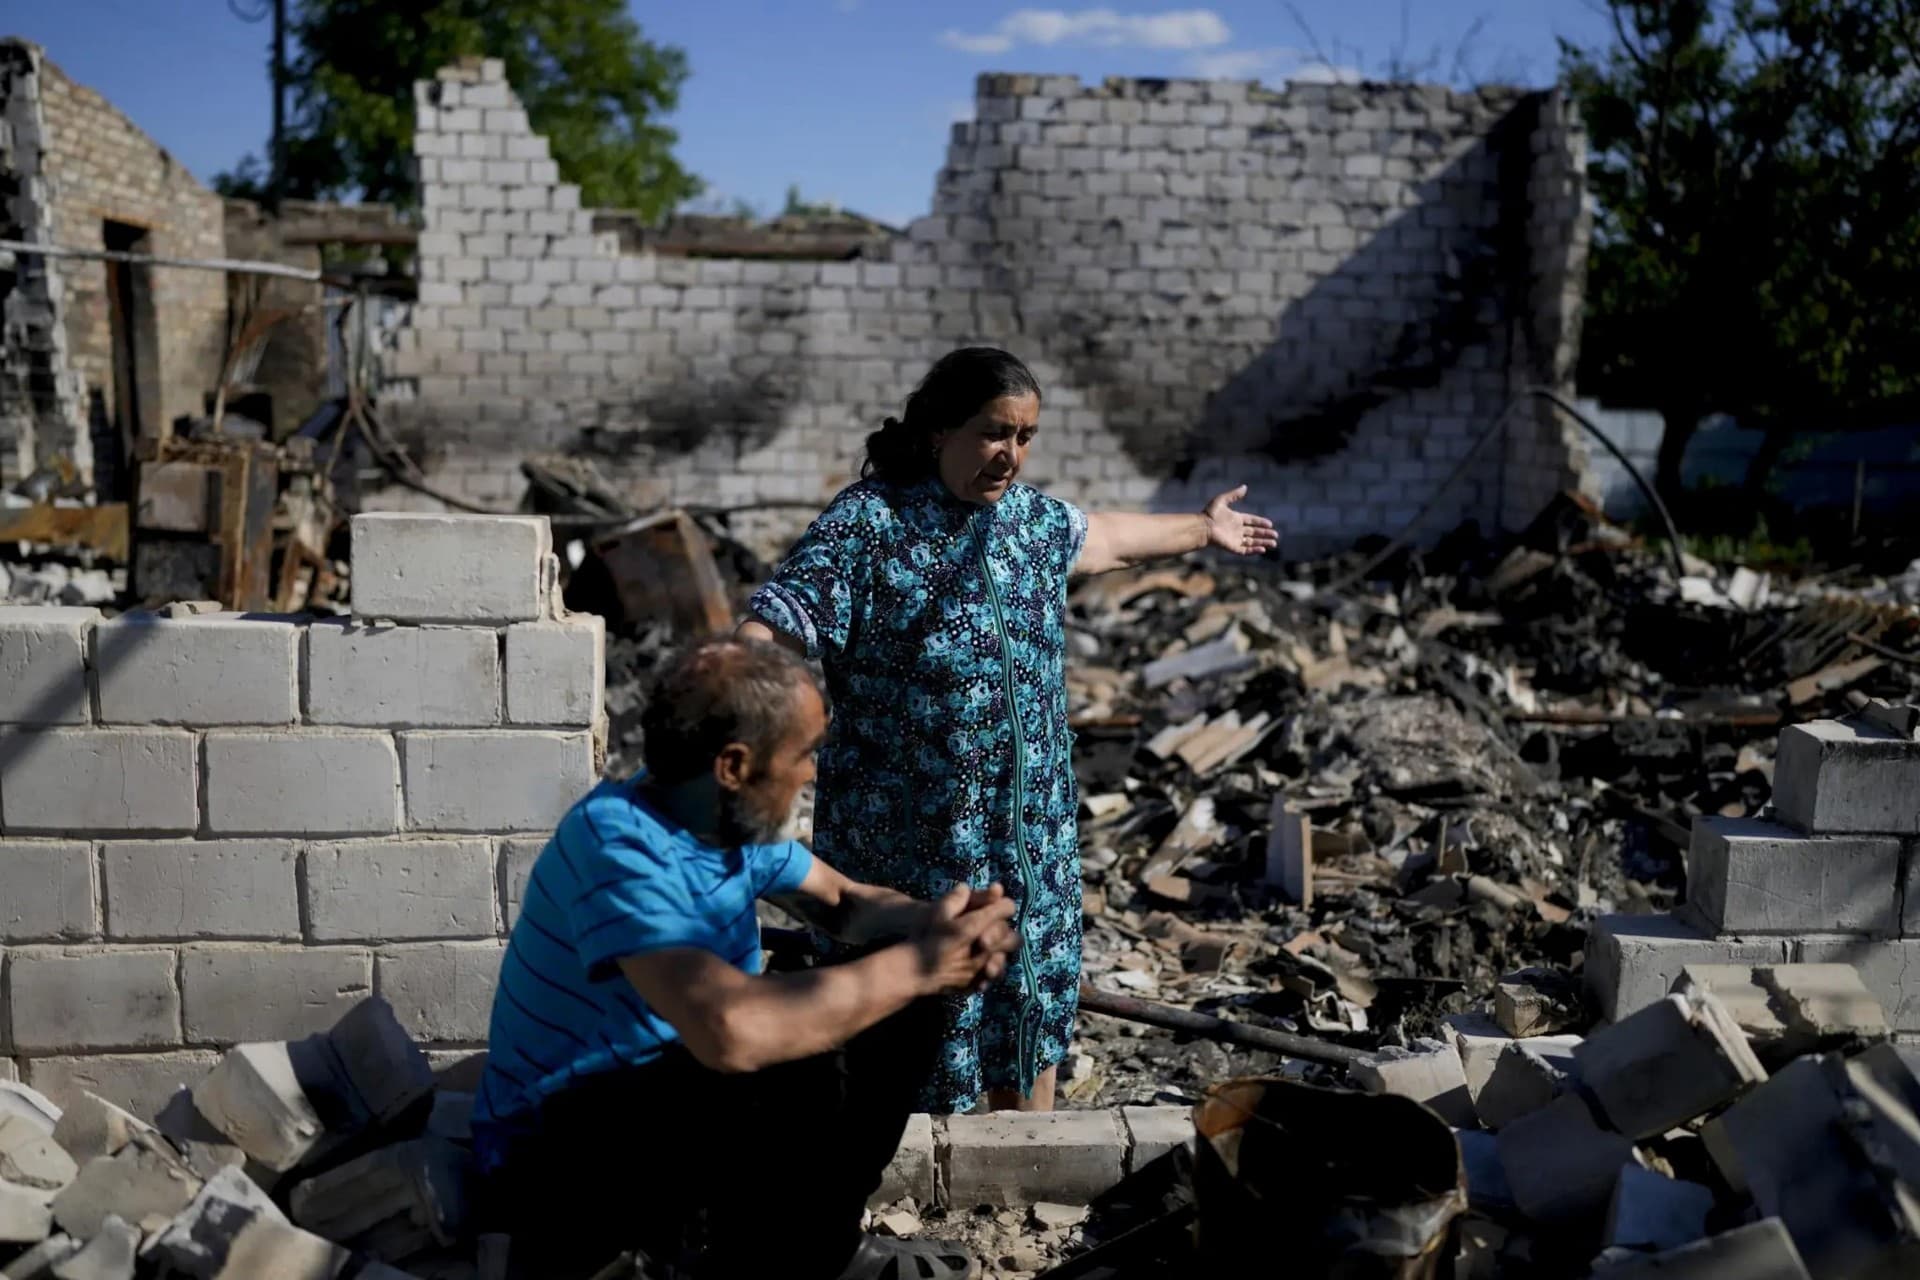 Nastasia Vladimirovna shows part of her house destroyed by attacks beside her husband in Mostyshche